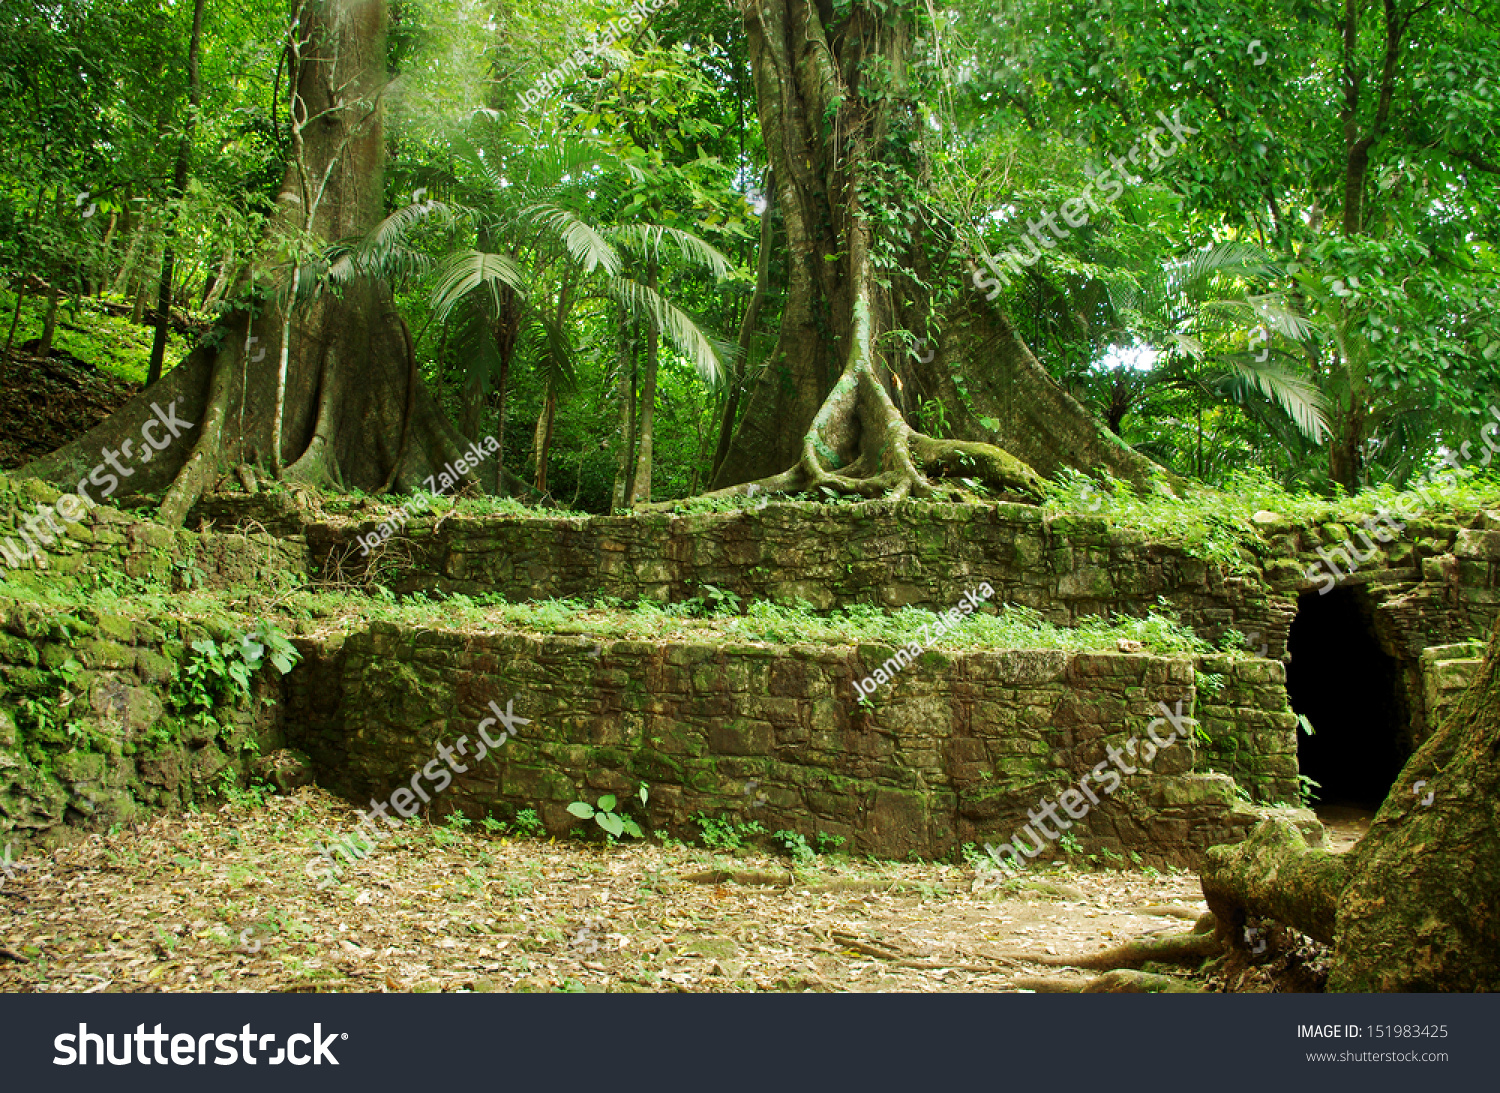 Palenque Ruins In Tropical Rainforest Stock Photo Shutterstock